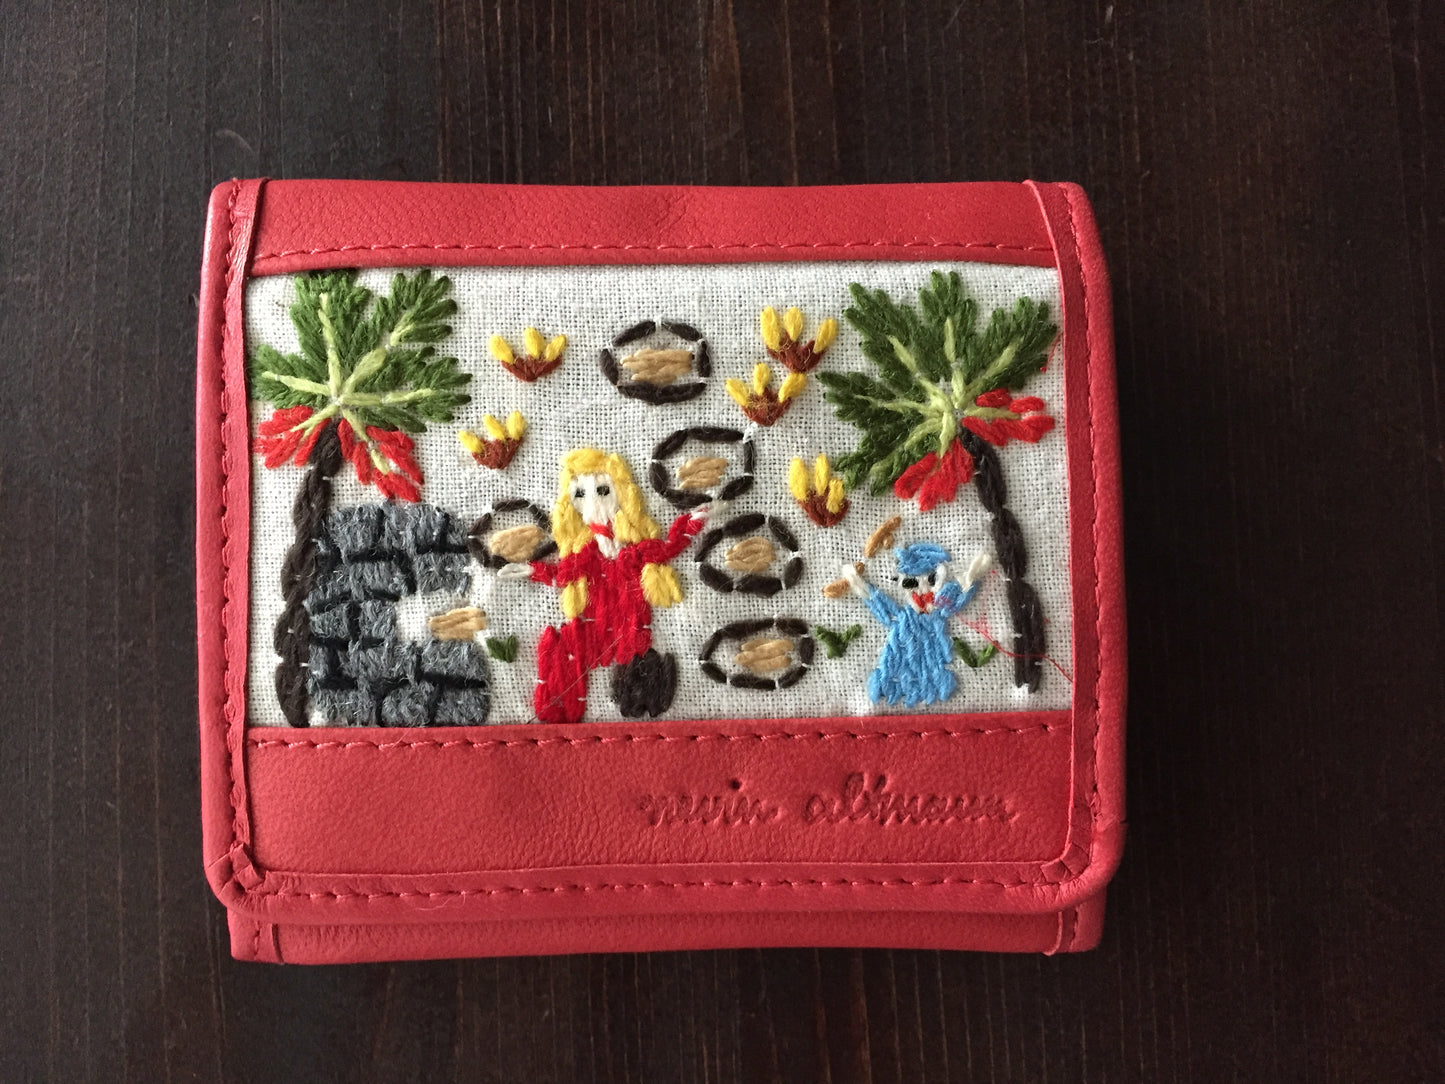 Handmade Leather Wallet with Hand Embroidery - Euro Wallet - Dandarah